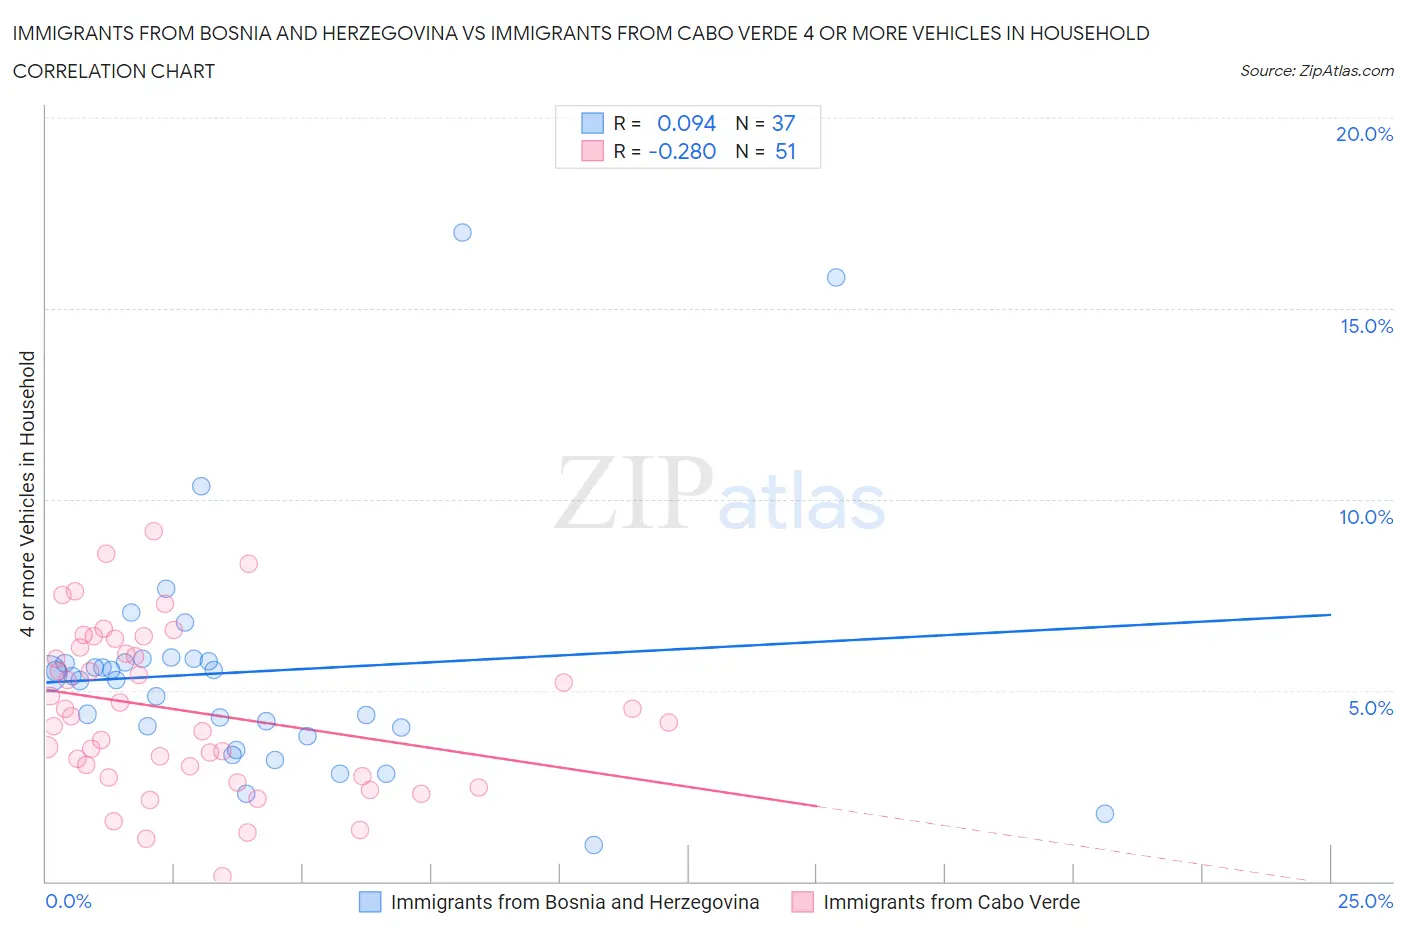 Immigrants from Bosnia and Herzegovina vs Immigrants from Cabo Verde 4 or more Vehicles in Household